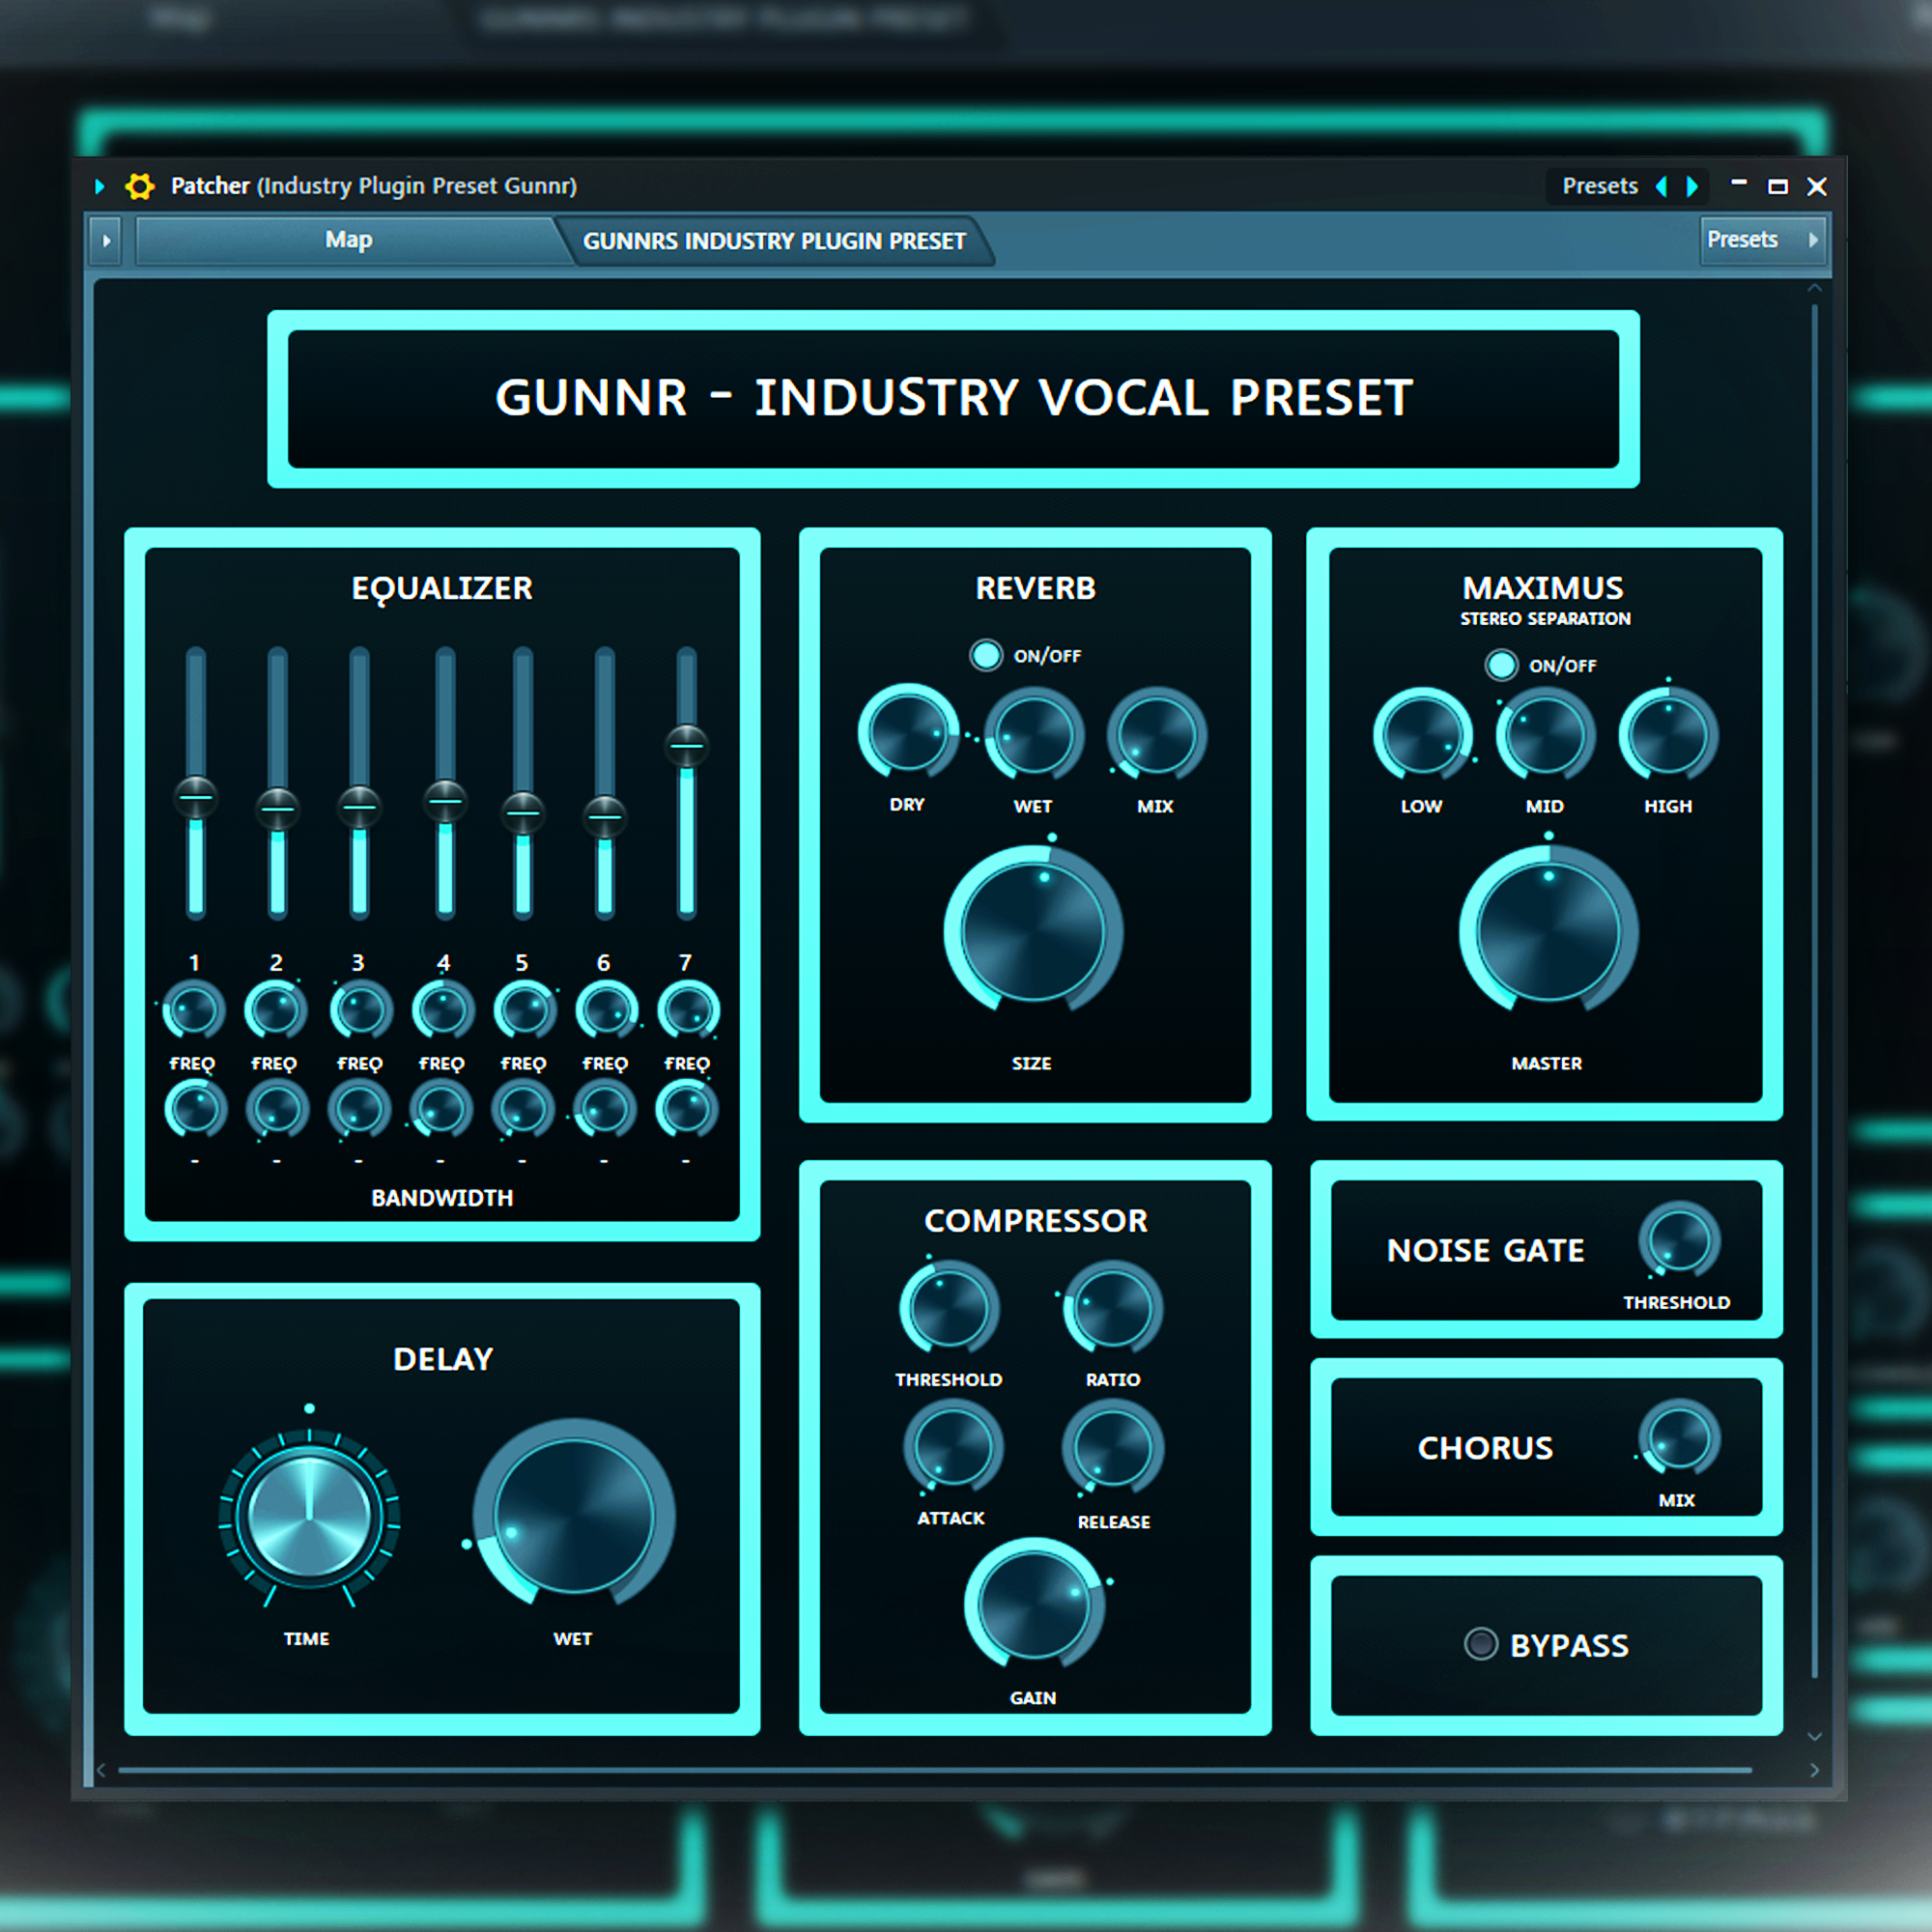 The Industry Vocal Preset